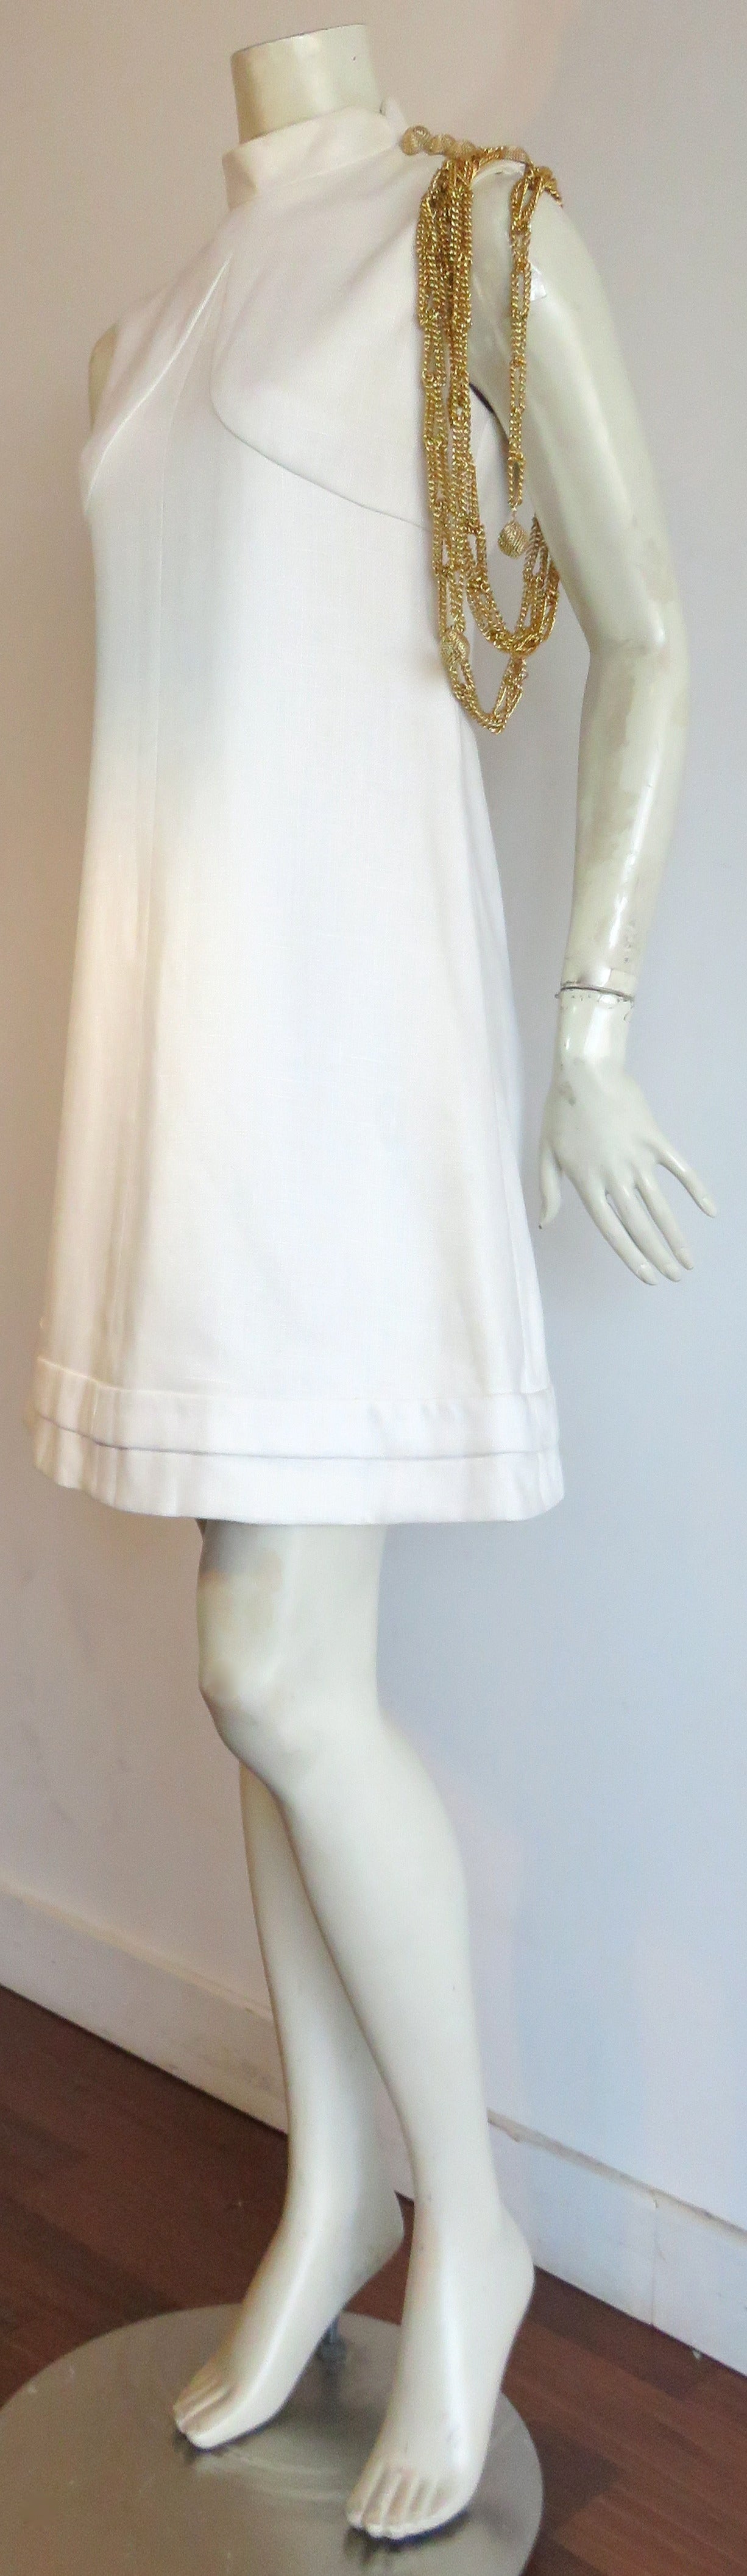 1960's BILL BLASS For MAURICE RENTNER Chain detail dress In Good Condition For Sale In Newport Beach, CA